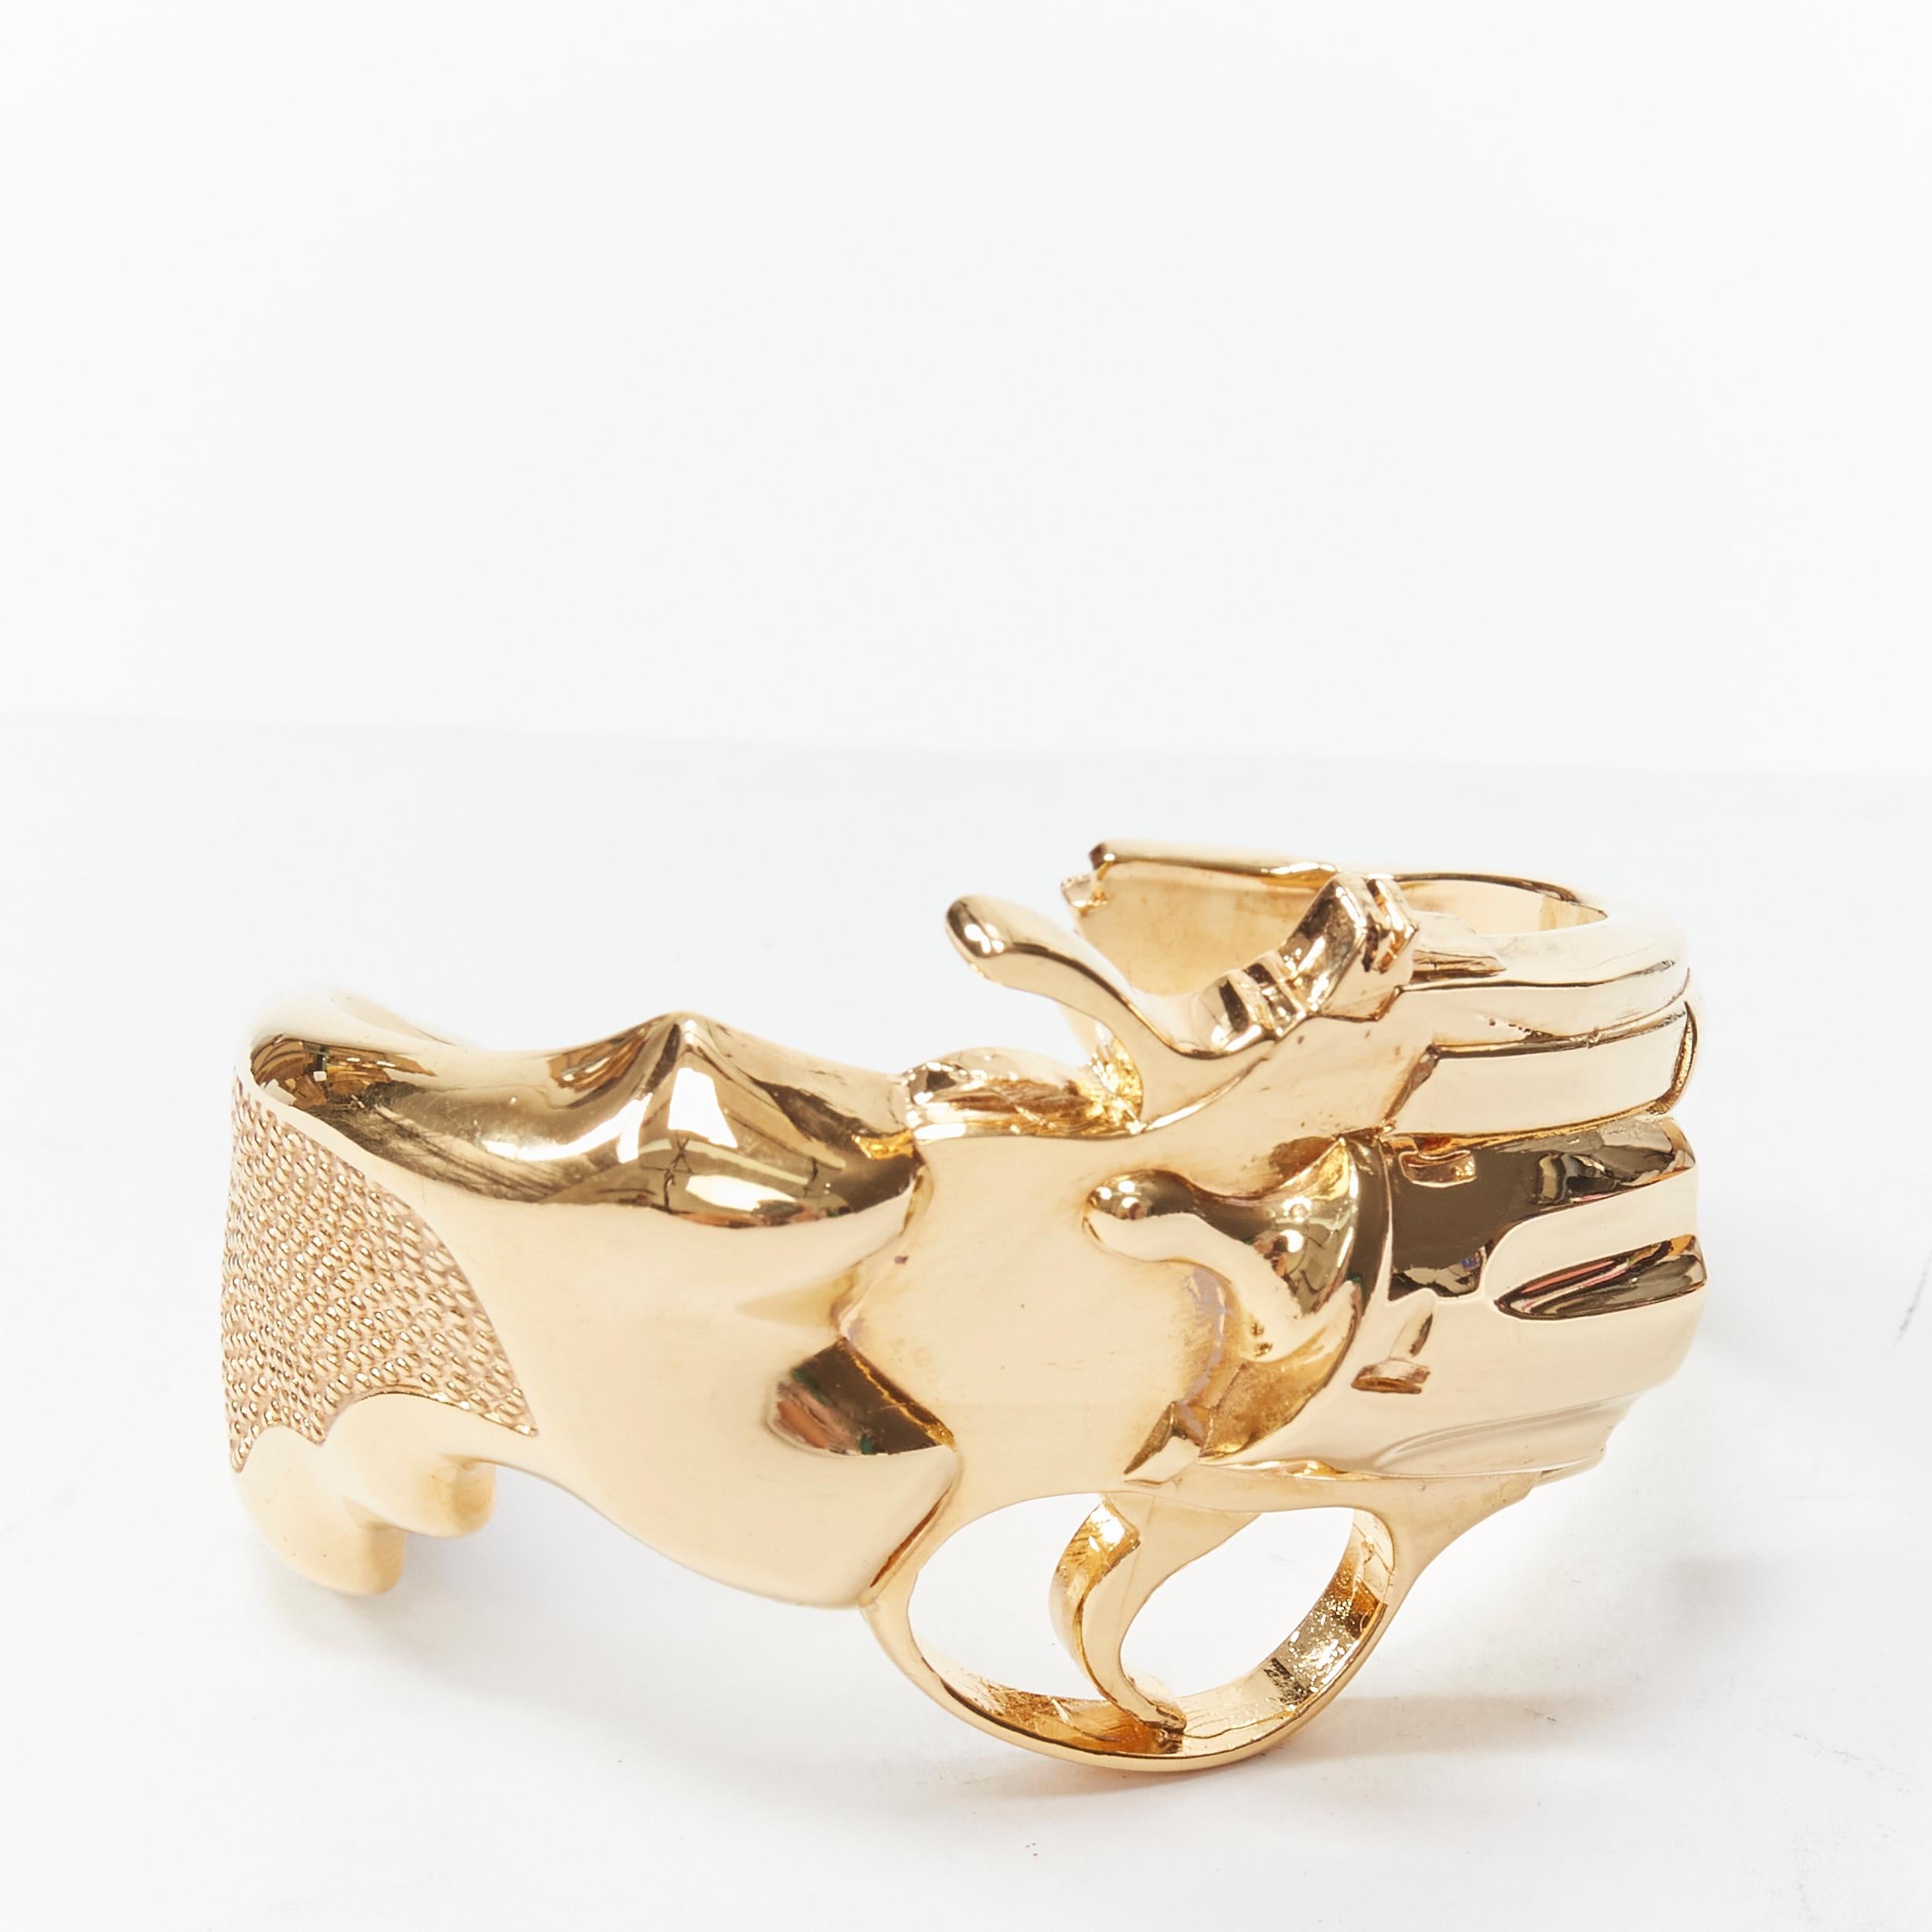 rare SAINT LAURENT 2014 Hedi Slimane Revolver Pistol Gun gold brass cuff 
Reference: TGAS/B01762 
Brand: Saint Laurent 
Designer: Hedi Slimane 
Collection: 2014 Runway 
Material: Brass 
Color: Gold 
Pattern: Solid 
Extra Detail: Very rare gold cuff